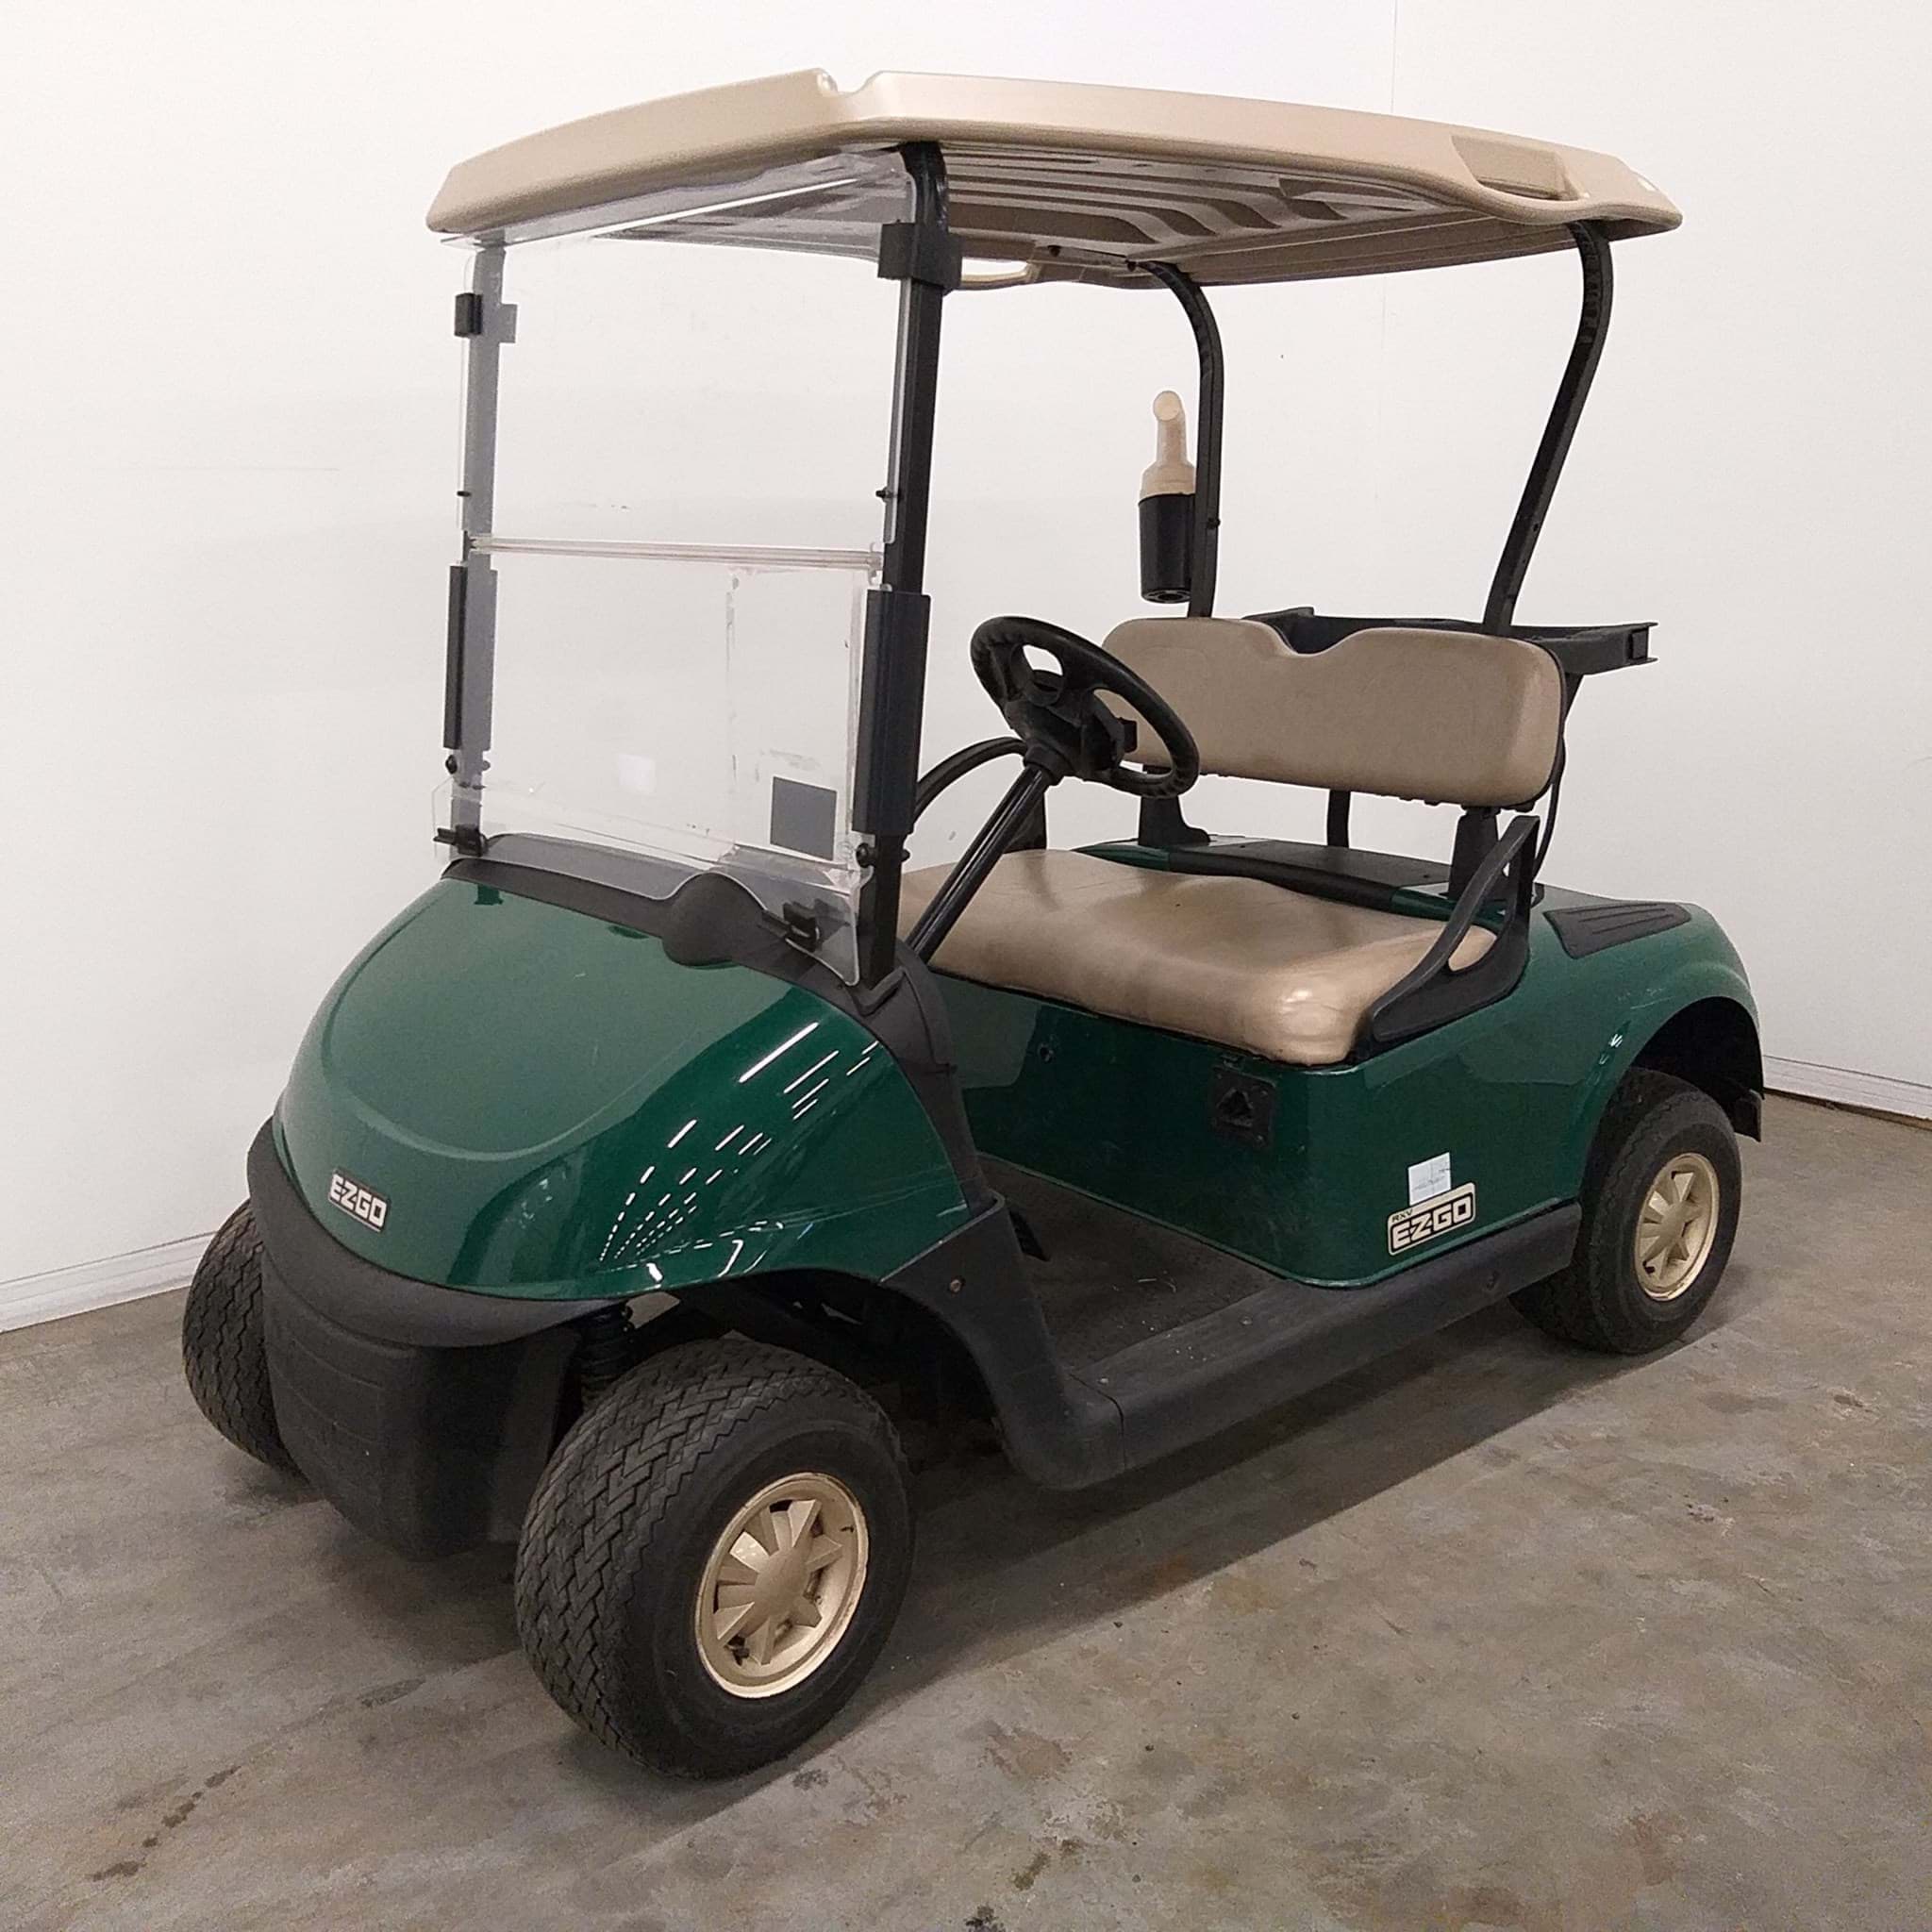 Picture of Used - 2018 - Electric (lithium) - E-Z-GO RXV - Green